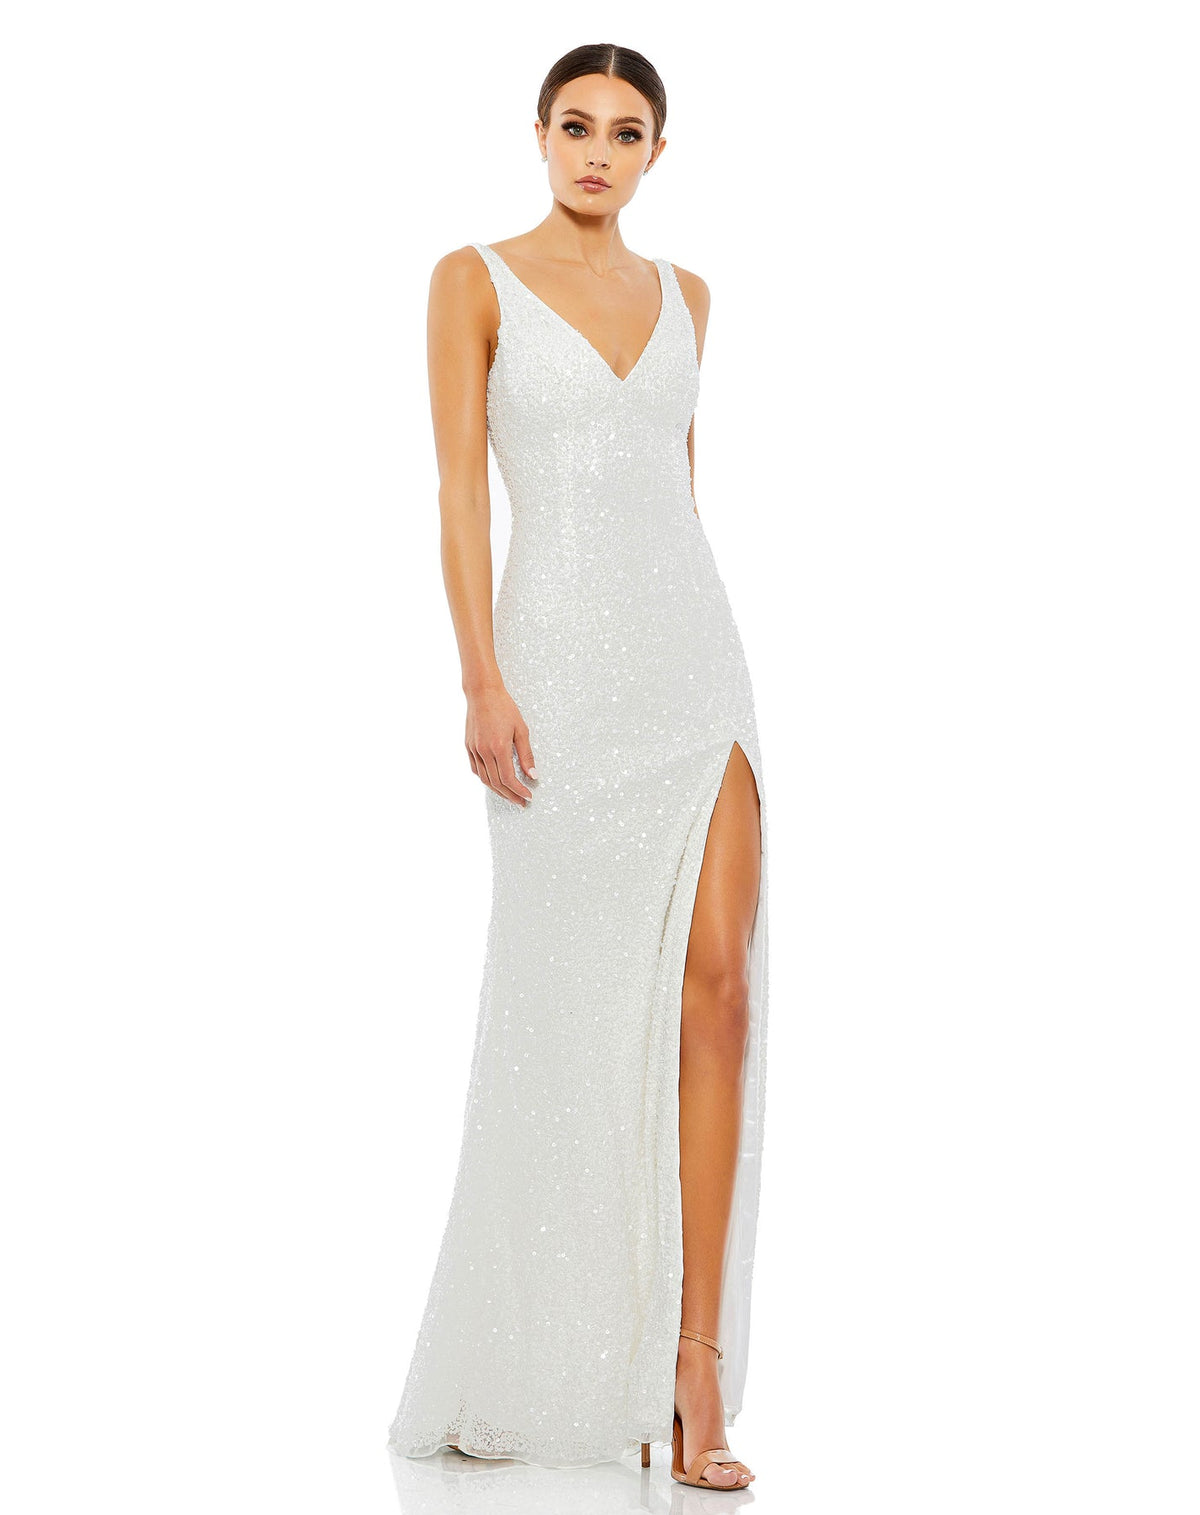 mac duggal, SEQUINED SLEEVELESS V NECK SIDE SLIT GOWN, Style #1068, ivory